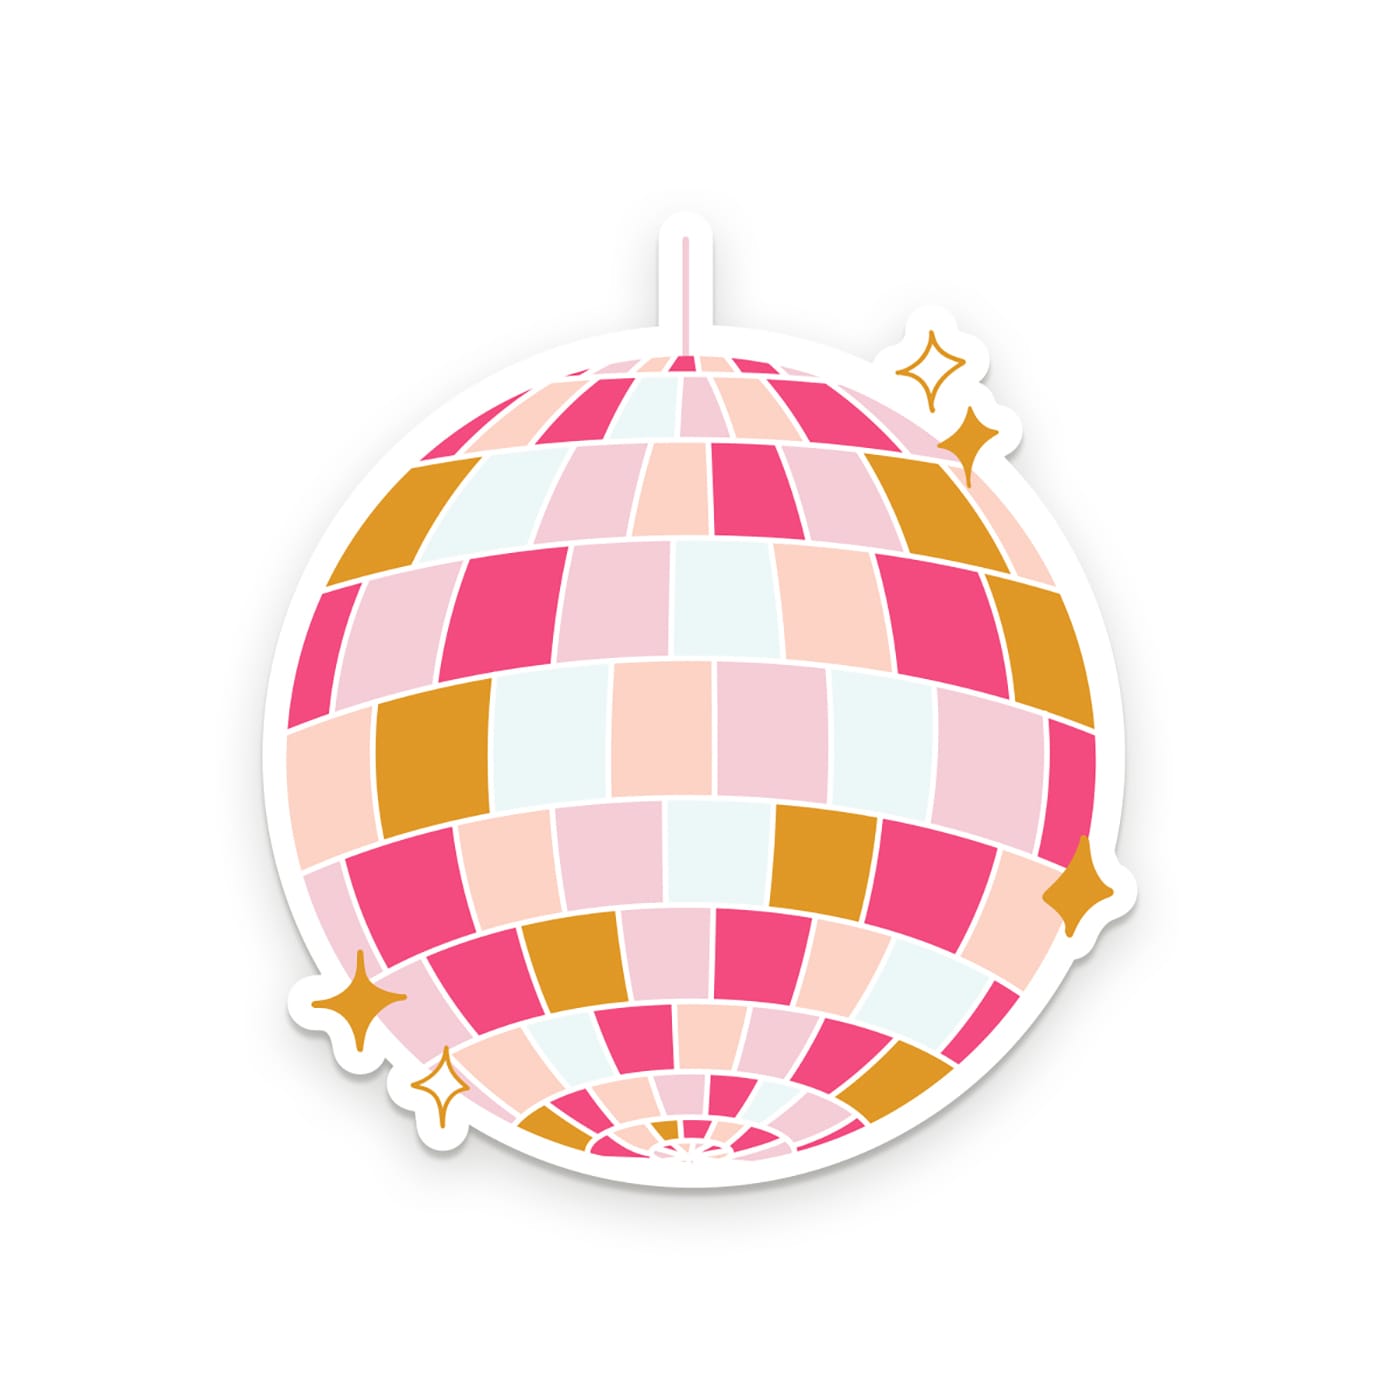 Follow The Call Of The Disco Ball Vinyl Sticker – Just Fabulous Palm Springs